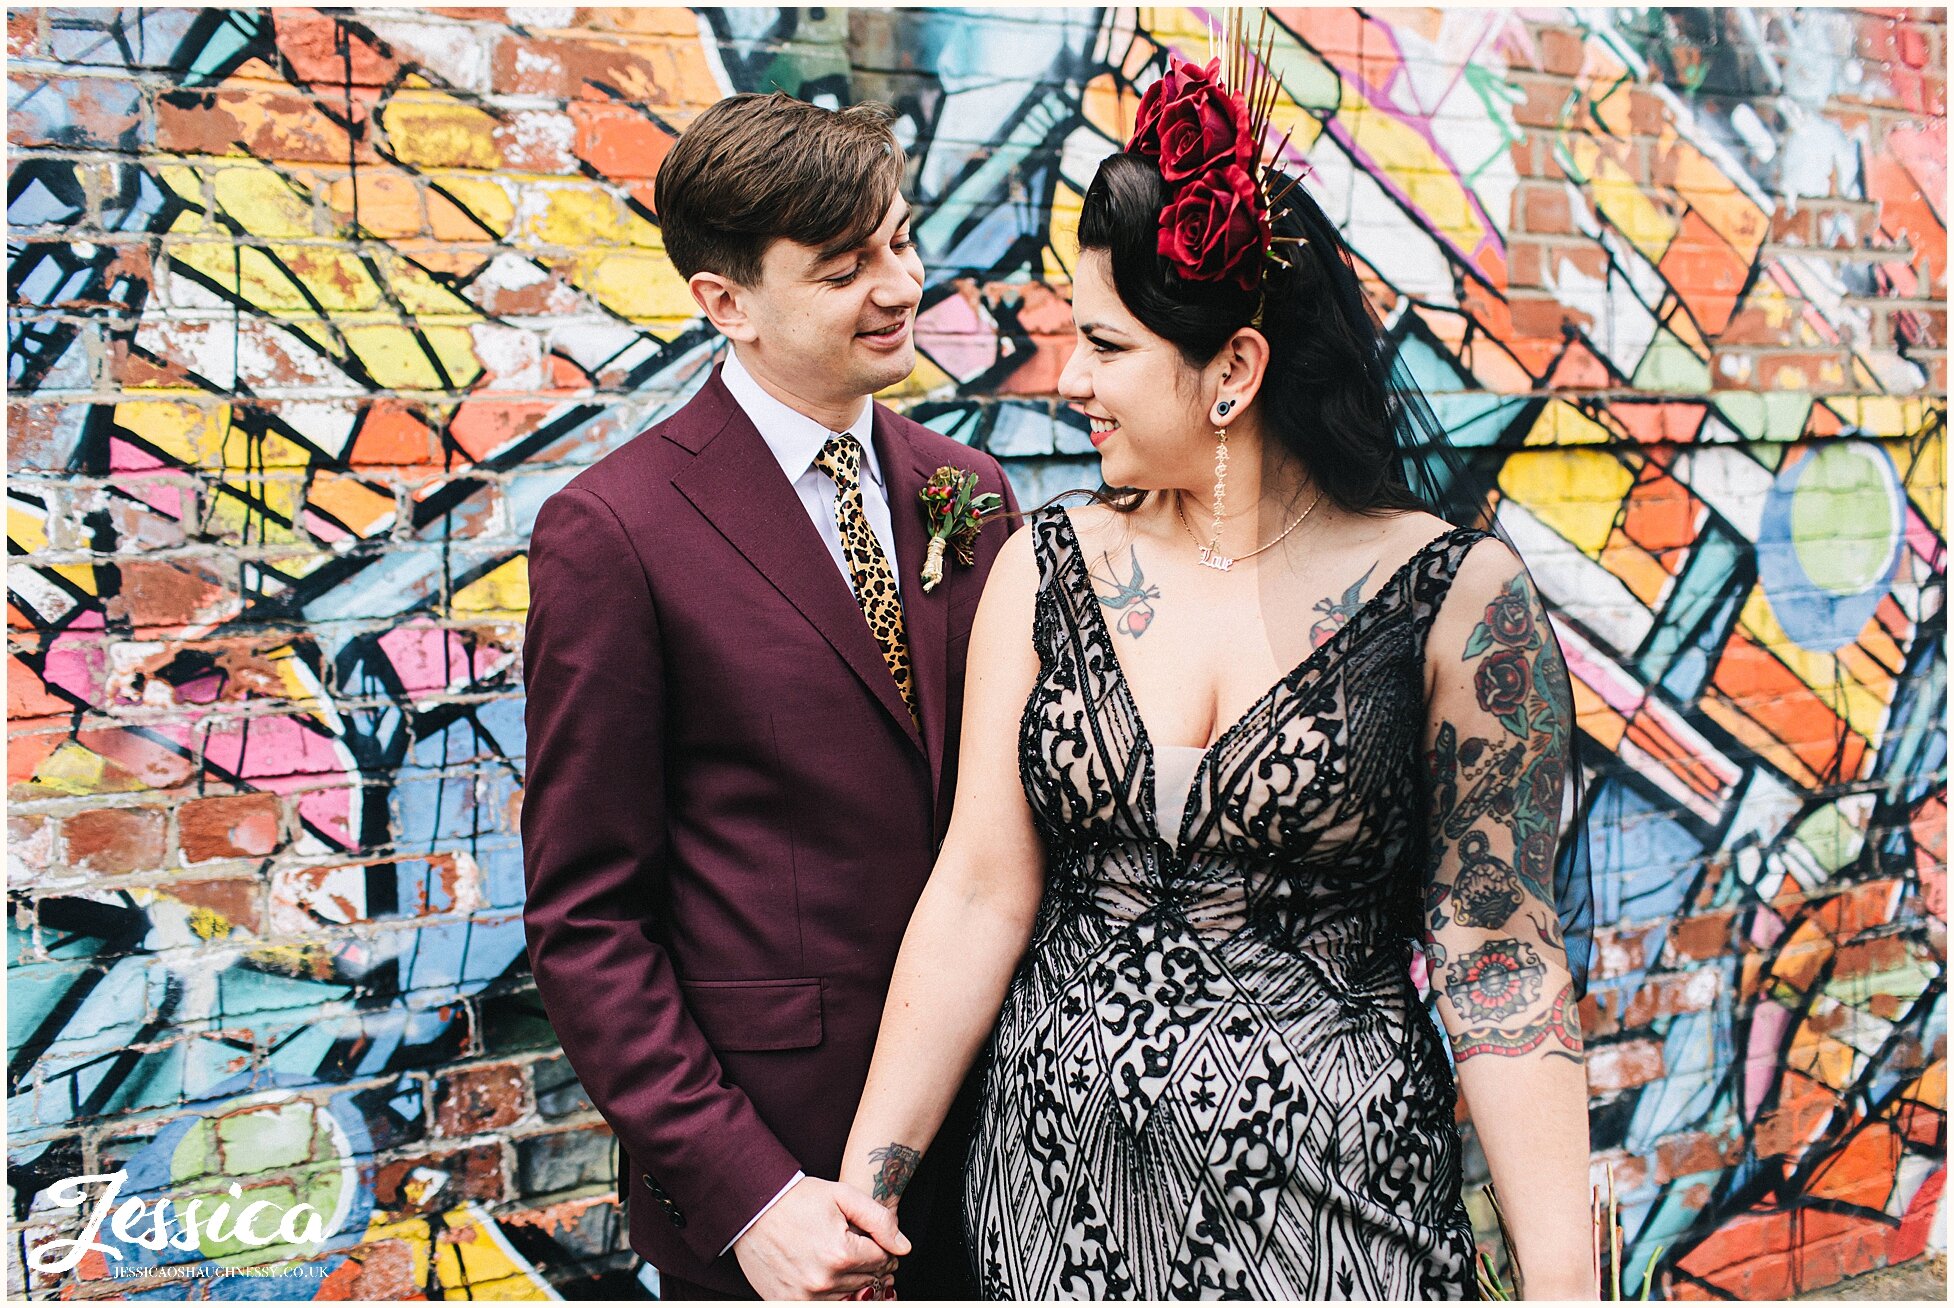 newly wed's stand in front of graffiti in the baltic triangle, liverpool